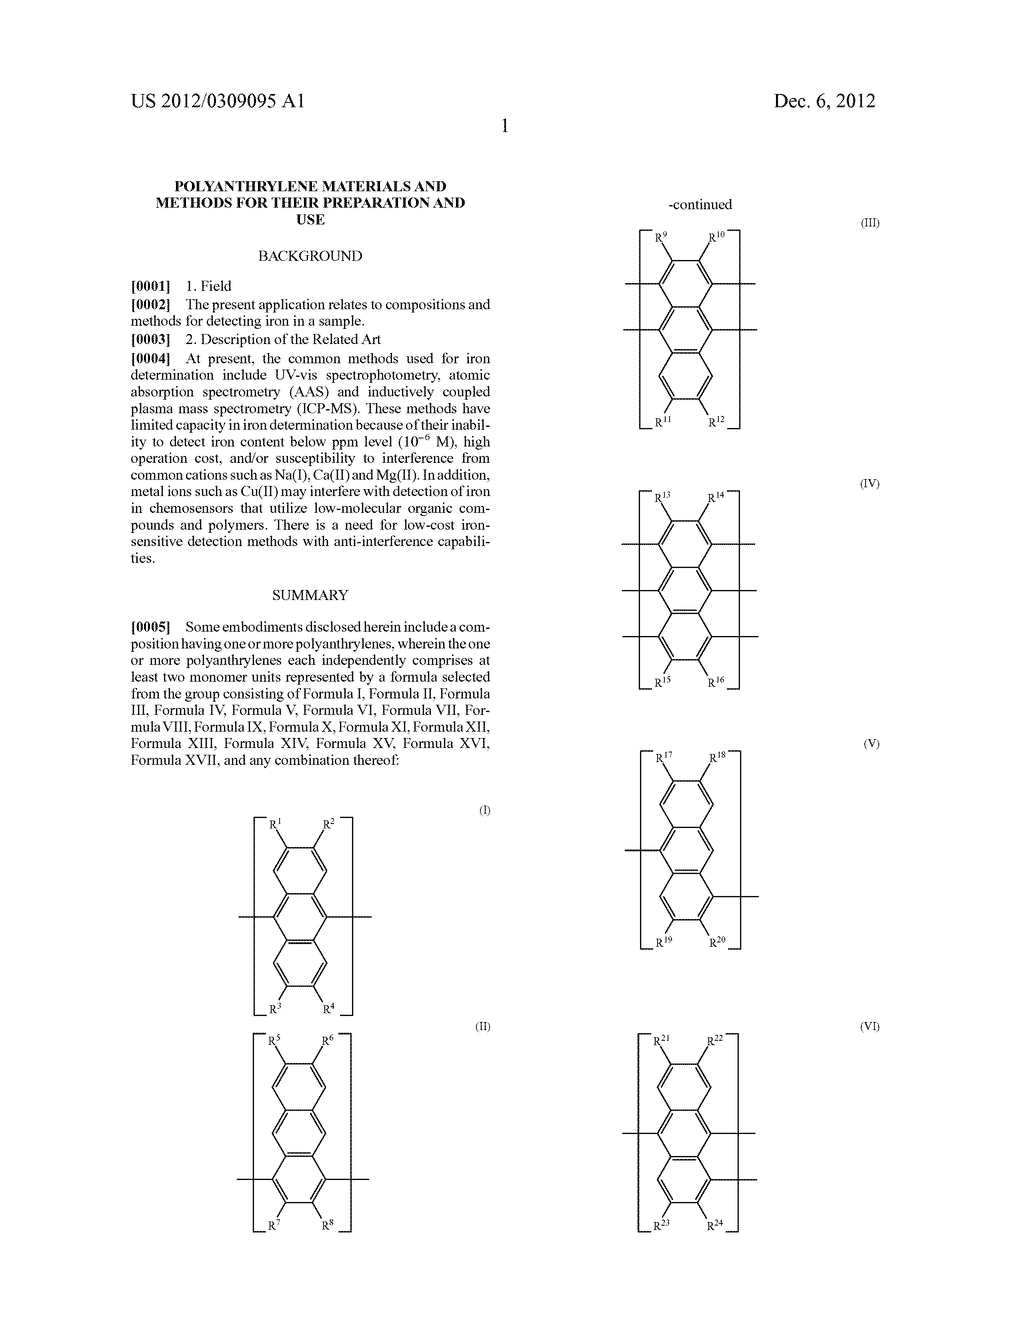 POLYANTHRYLENE MATERIALS AND METHODS FOR THEIR PREPARATION AND USE - diagram, schematic, and image 10